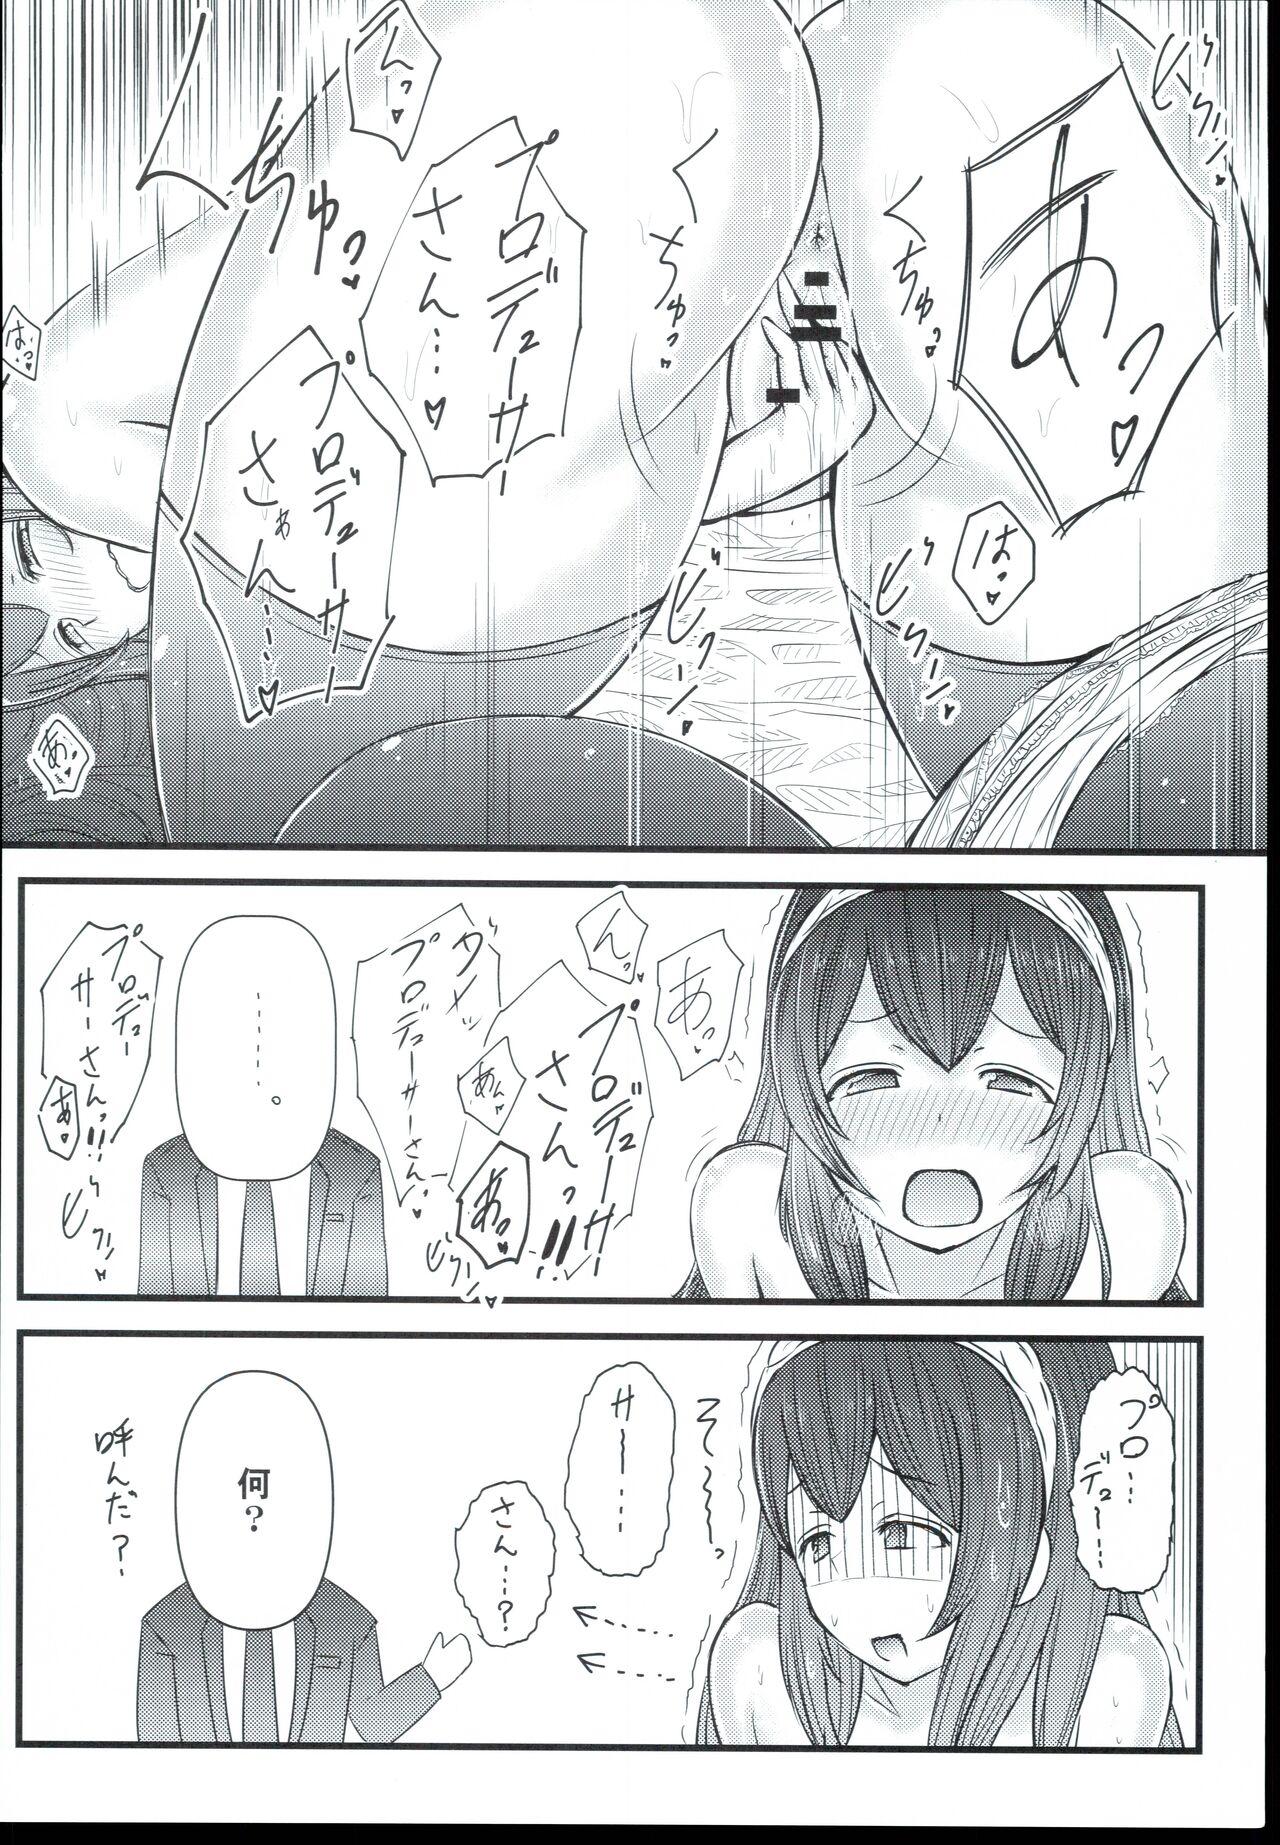 Femdom Clips Fumifumi? Fumifumi. Fumifumi... Fumifumi!! - The idolmaster Shemale - Page 8